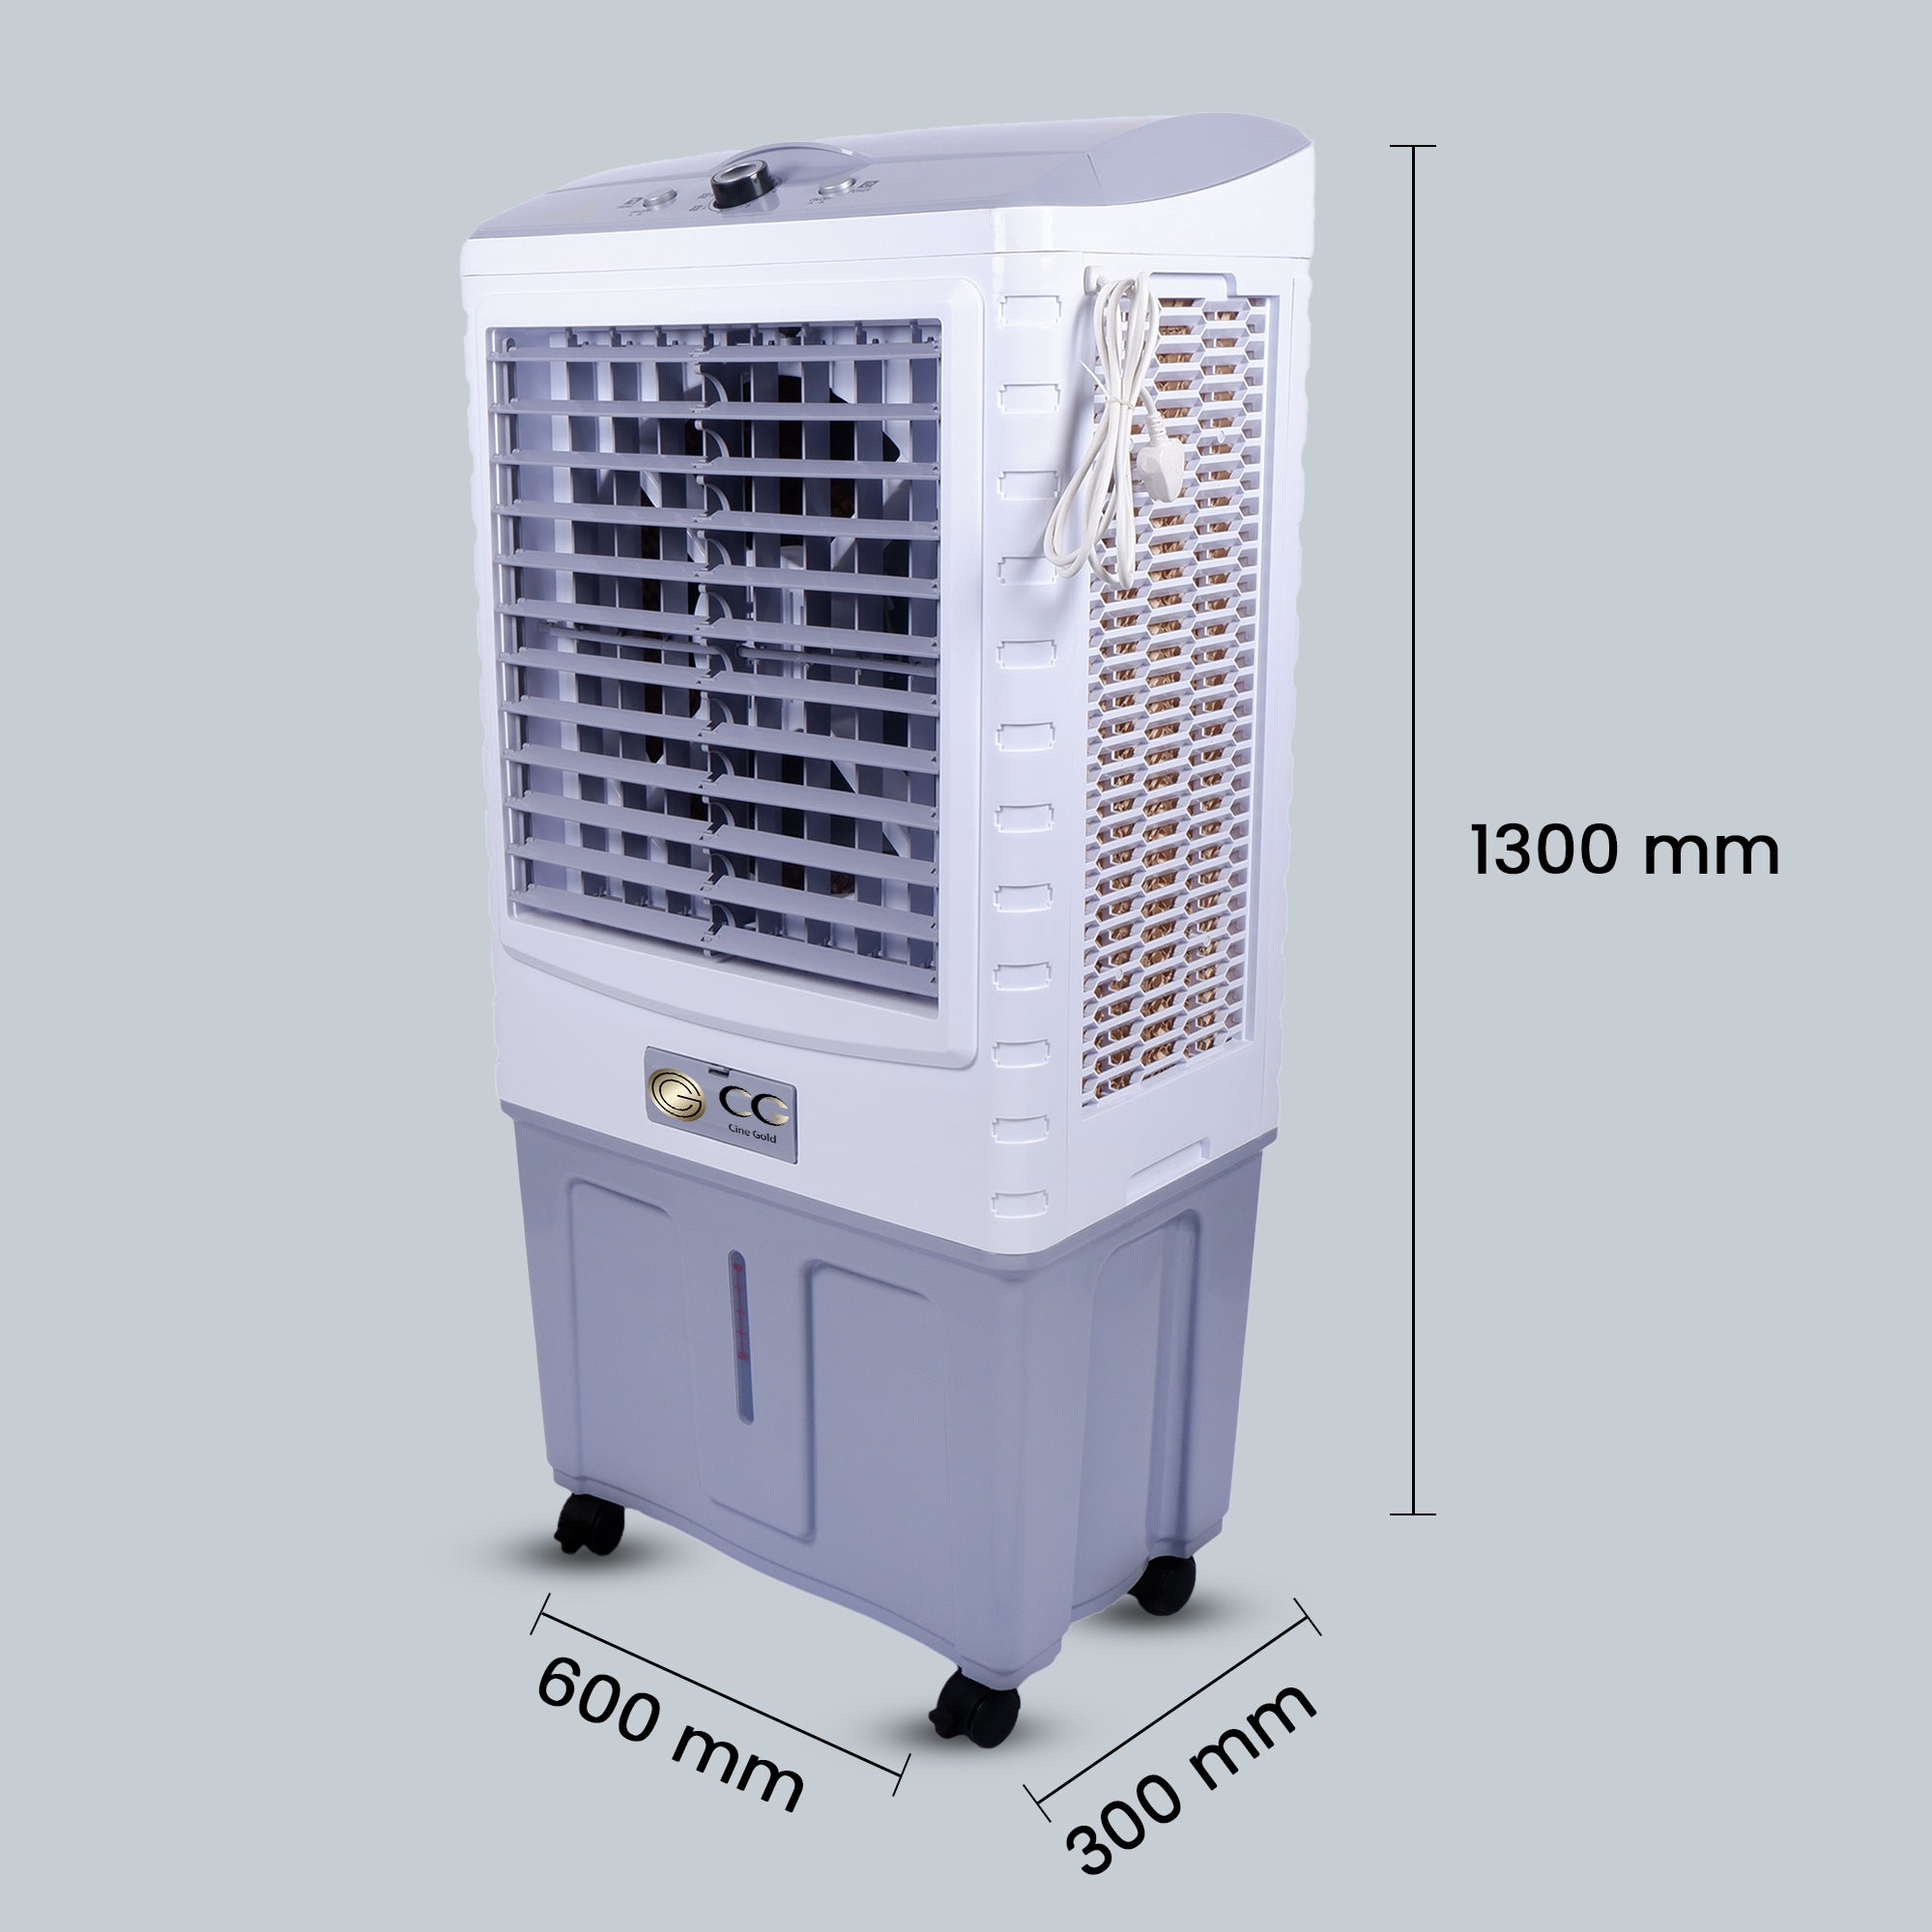 Cine Gold Hurricane 90 LTR Heavy Duty Tower Air Cooler For Home/Office With Honeycomb Cooling & Auto Swing Technology, Powerful Air Throw & 3-Speed Control With Ice Chamber White & Light Grey